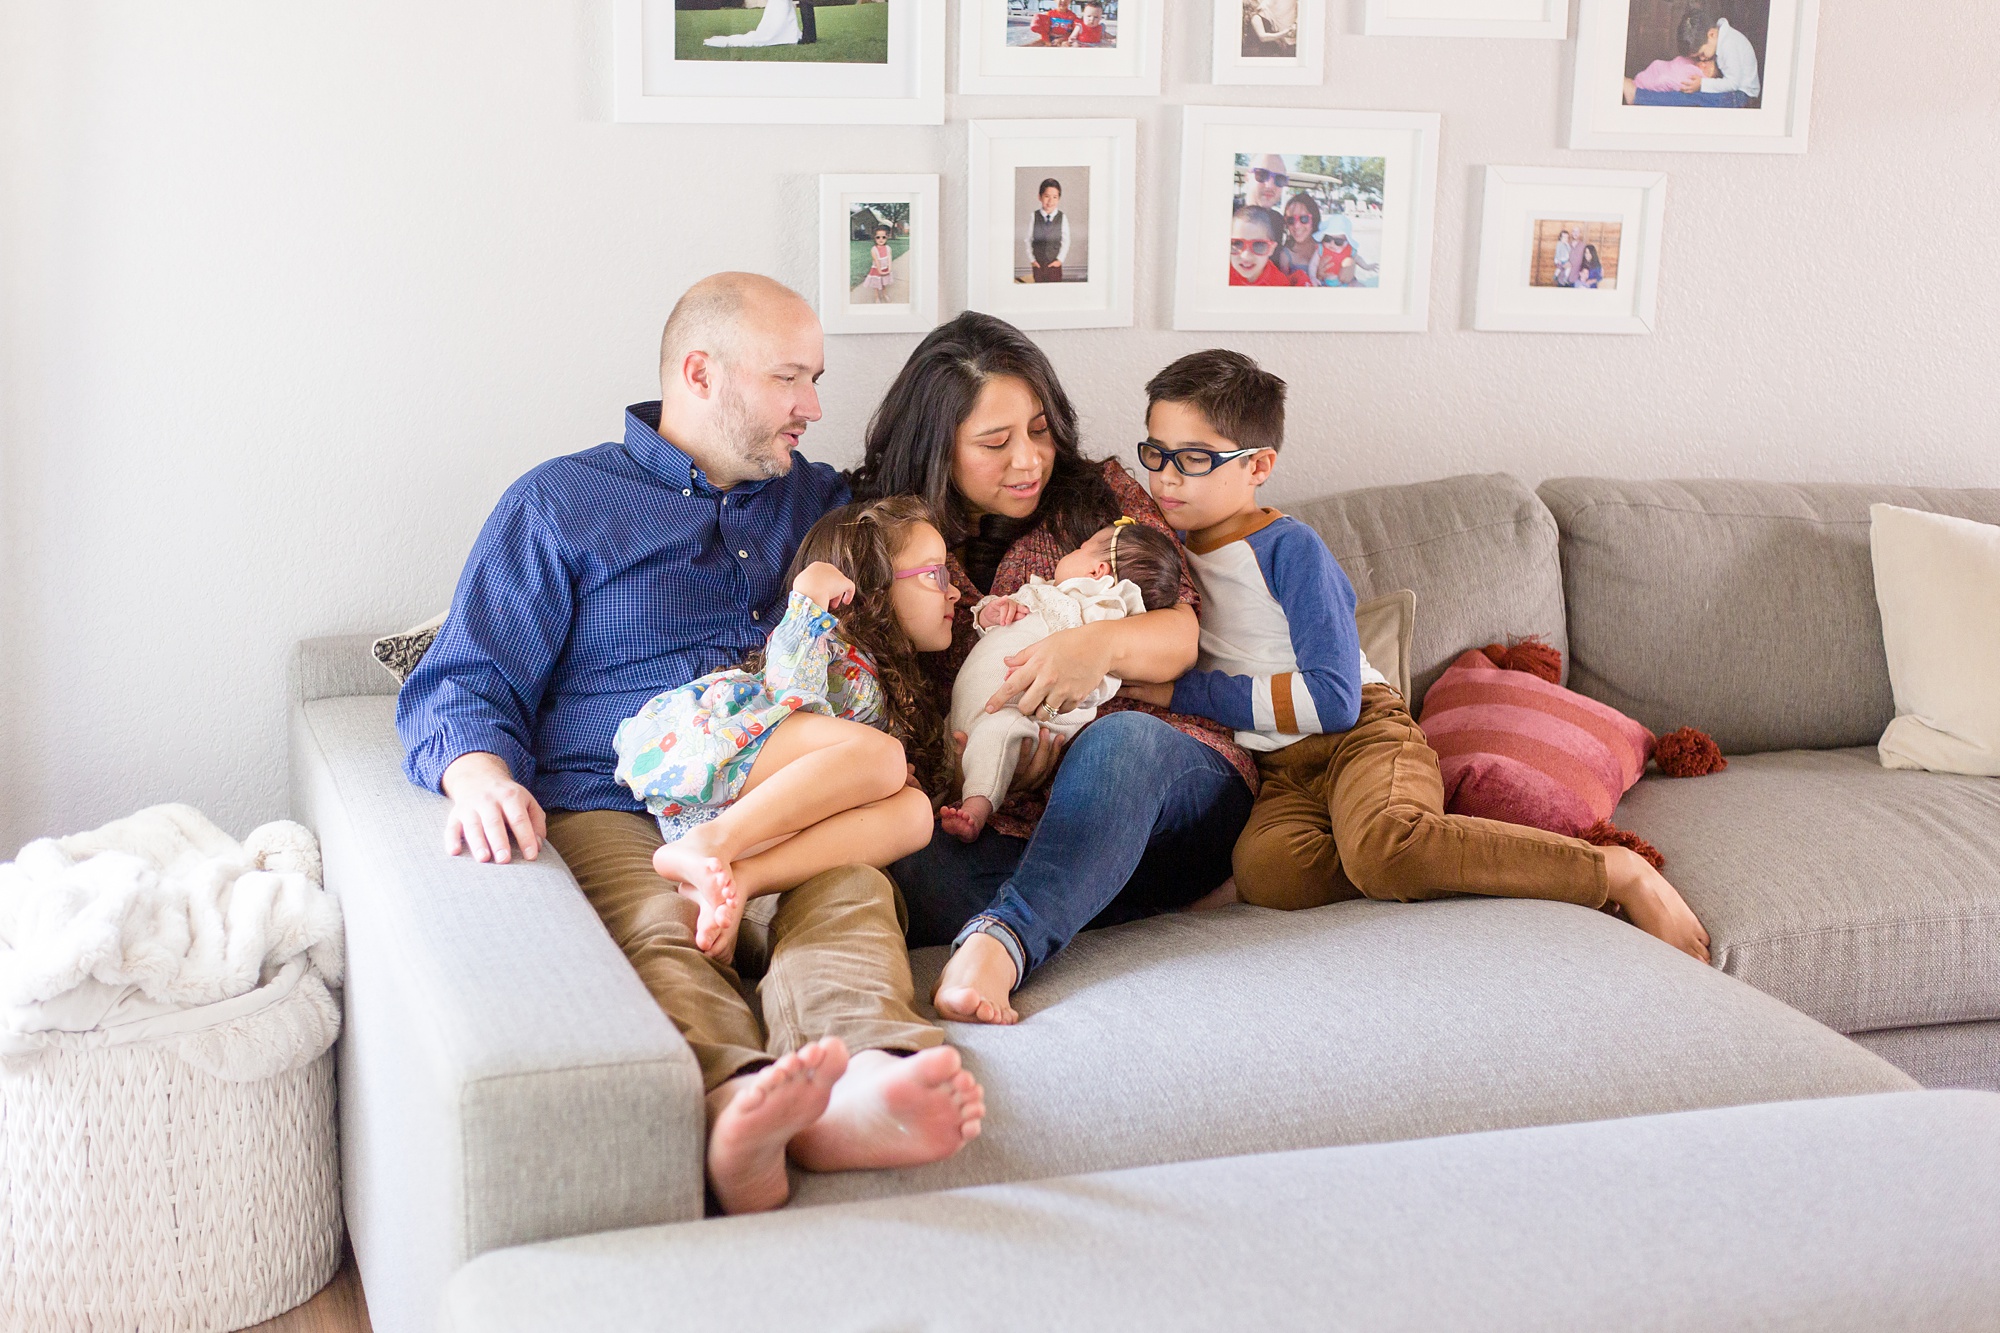 parents hold newborn baby girl during portraits at home